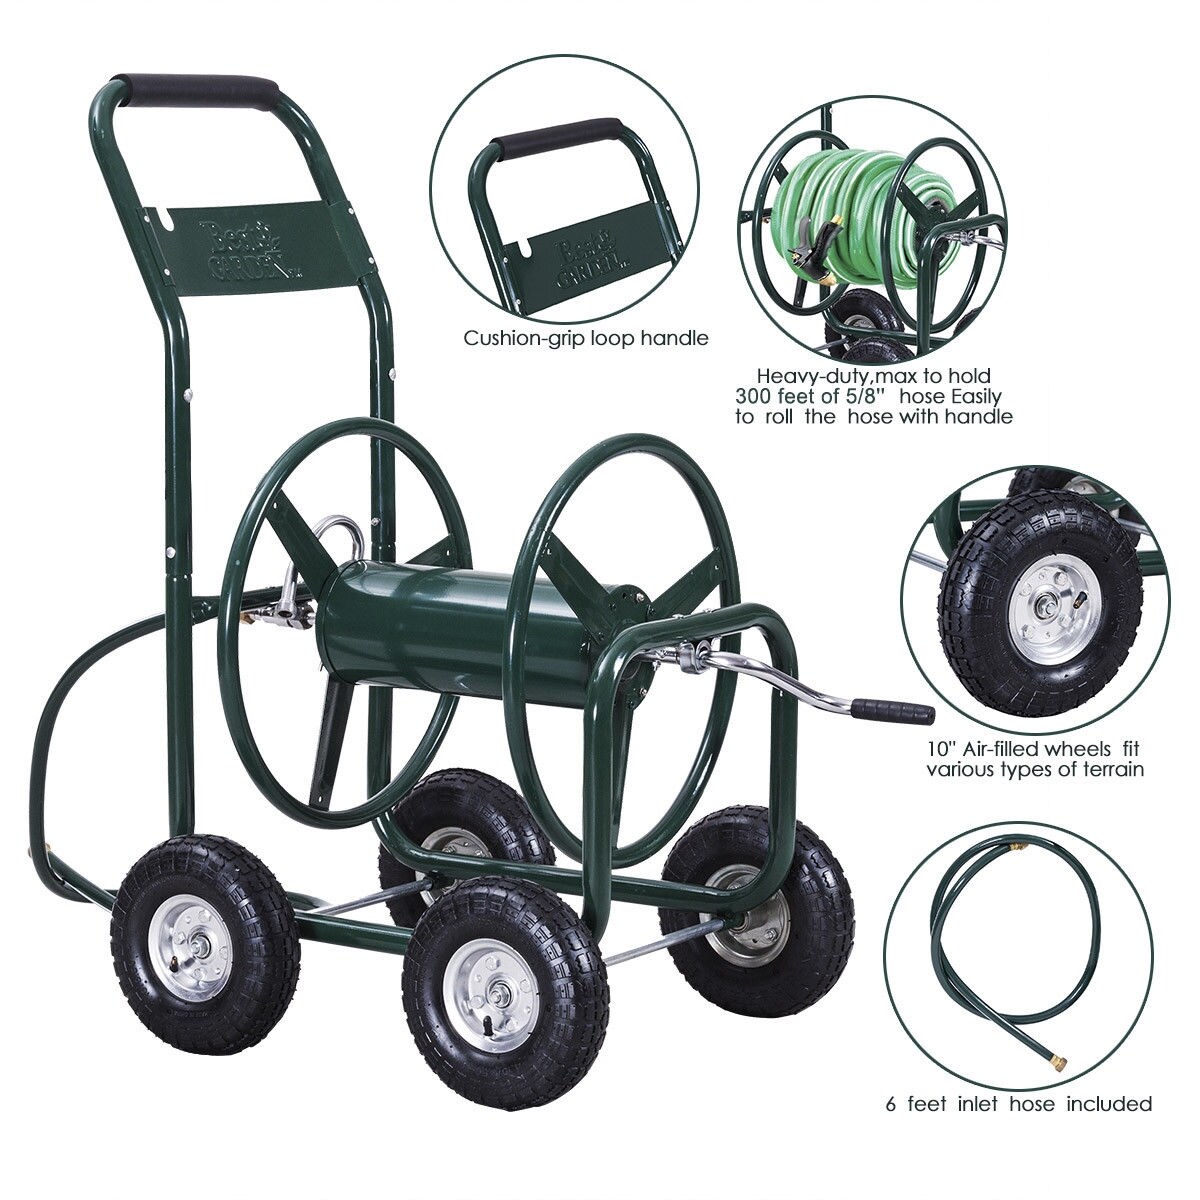 WELLFOR Portable Green Garden Hose Reel Cart with 300 ft Capacity, Steel Construction, Manual Operation | TBG3381